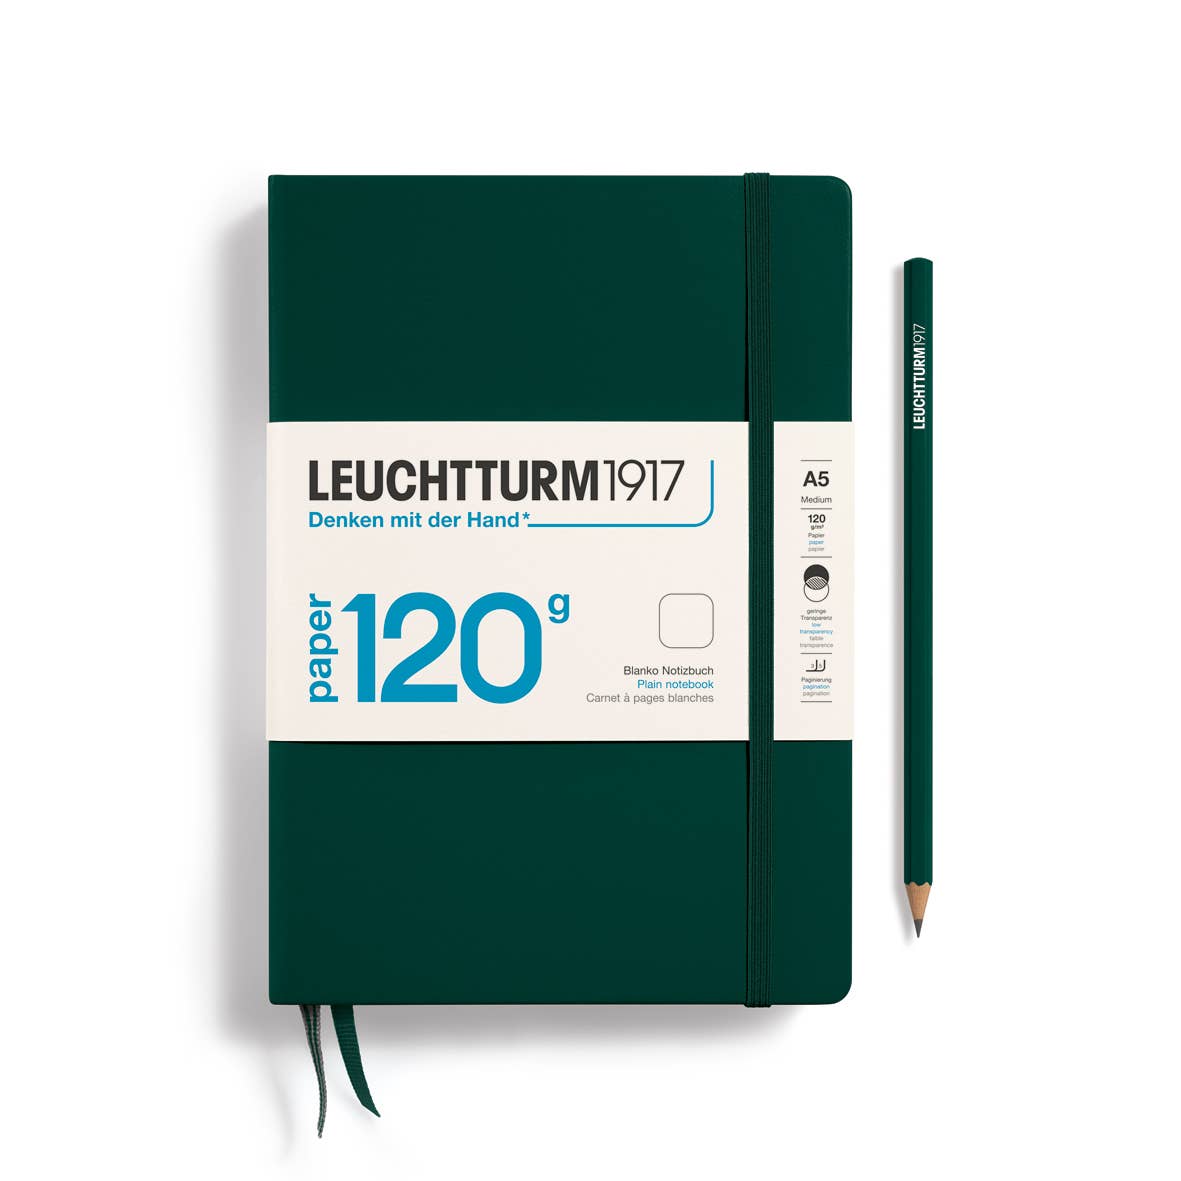 120g Notebook Edition, Medium, 203 p.: Dotted / Forest Green